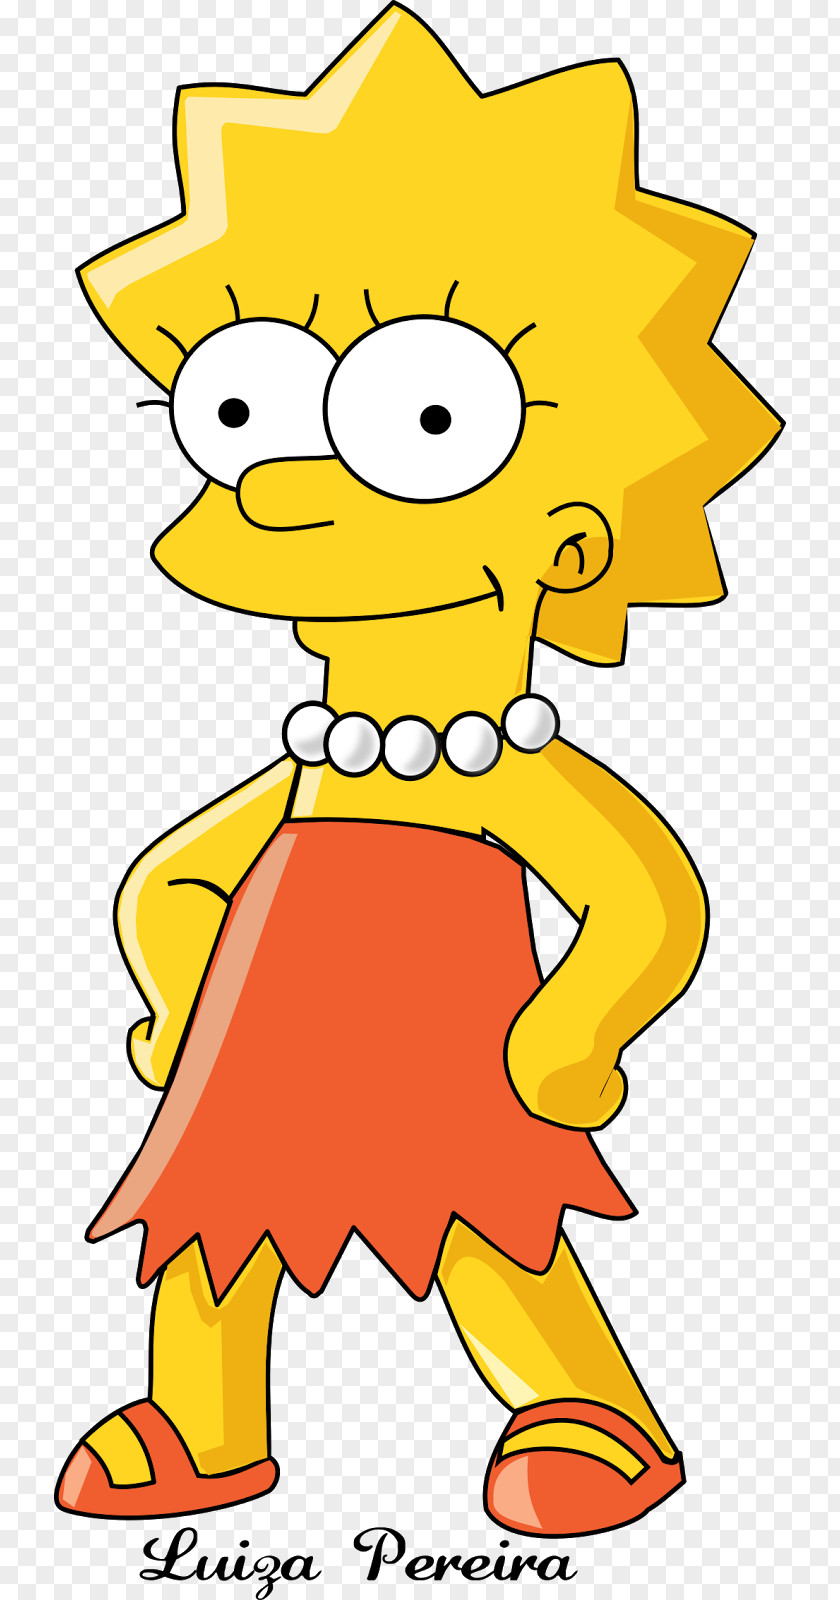 Bart Simpson Lisa Marge Maggie The Simpsons: Tapped Out PNG